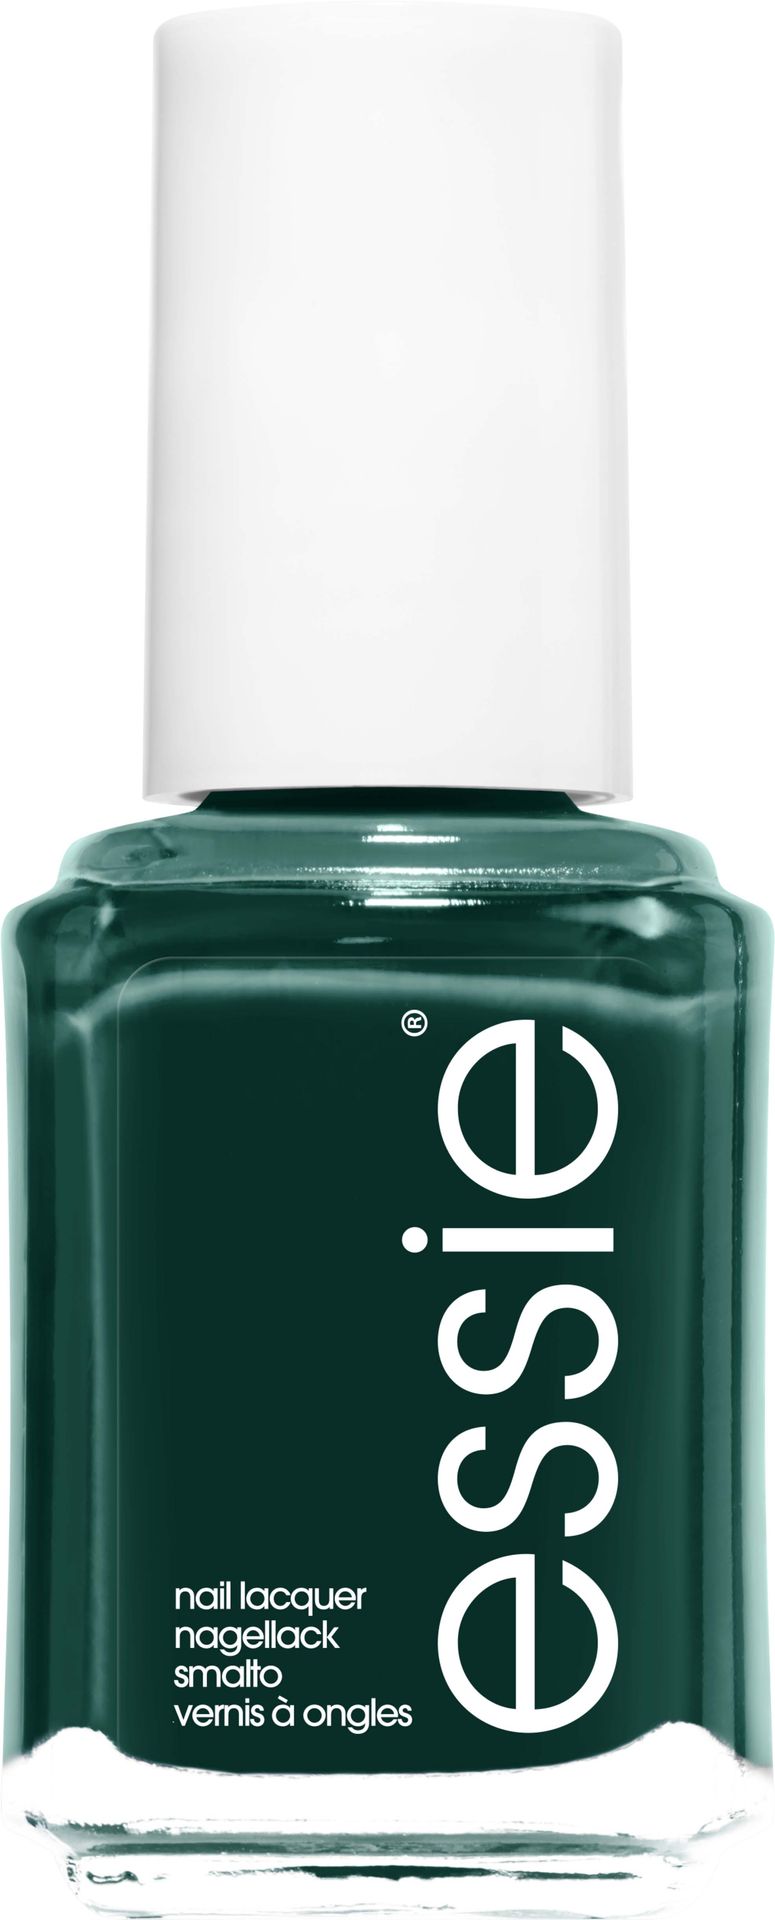 Essie Summer Collection Nail Lacquer 399 off tropic